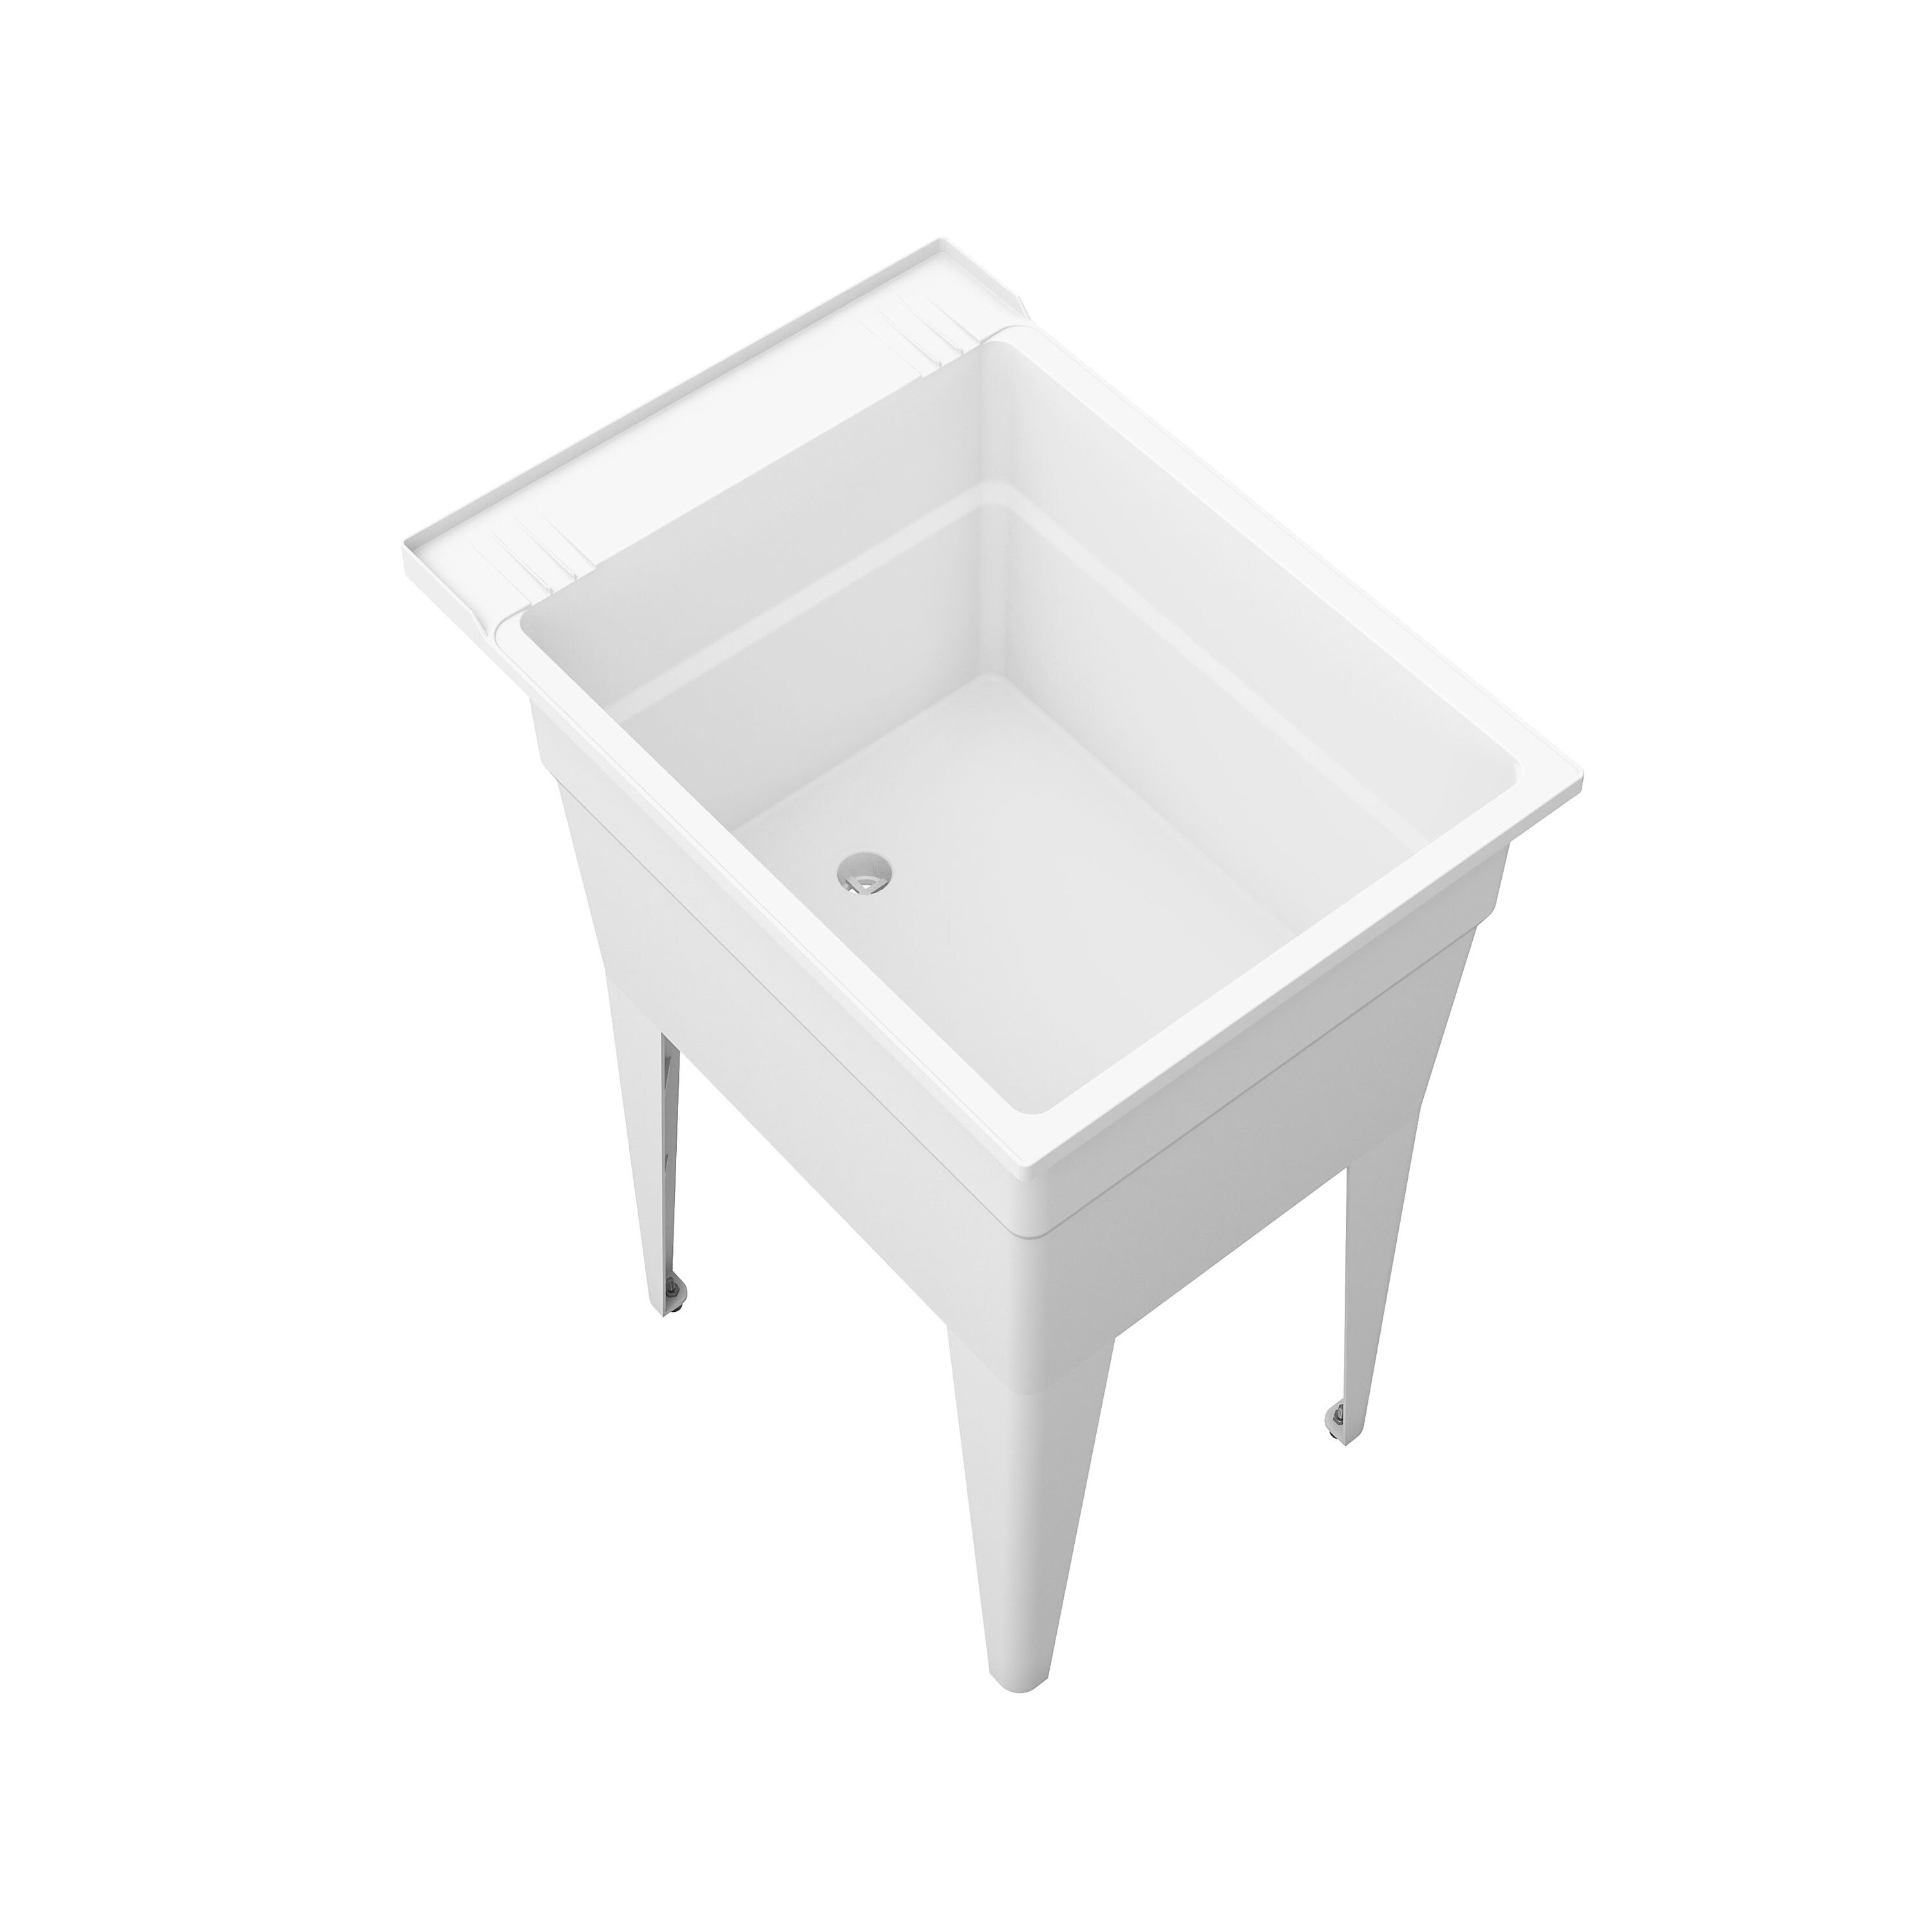 Rugged Tub 18 in. x 24 in. Polypropylene Granite Laundry Sink, White with Grey Specs N52G-1